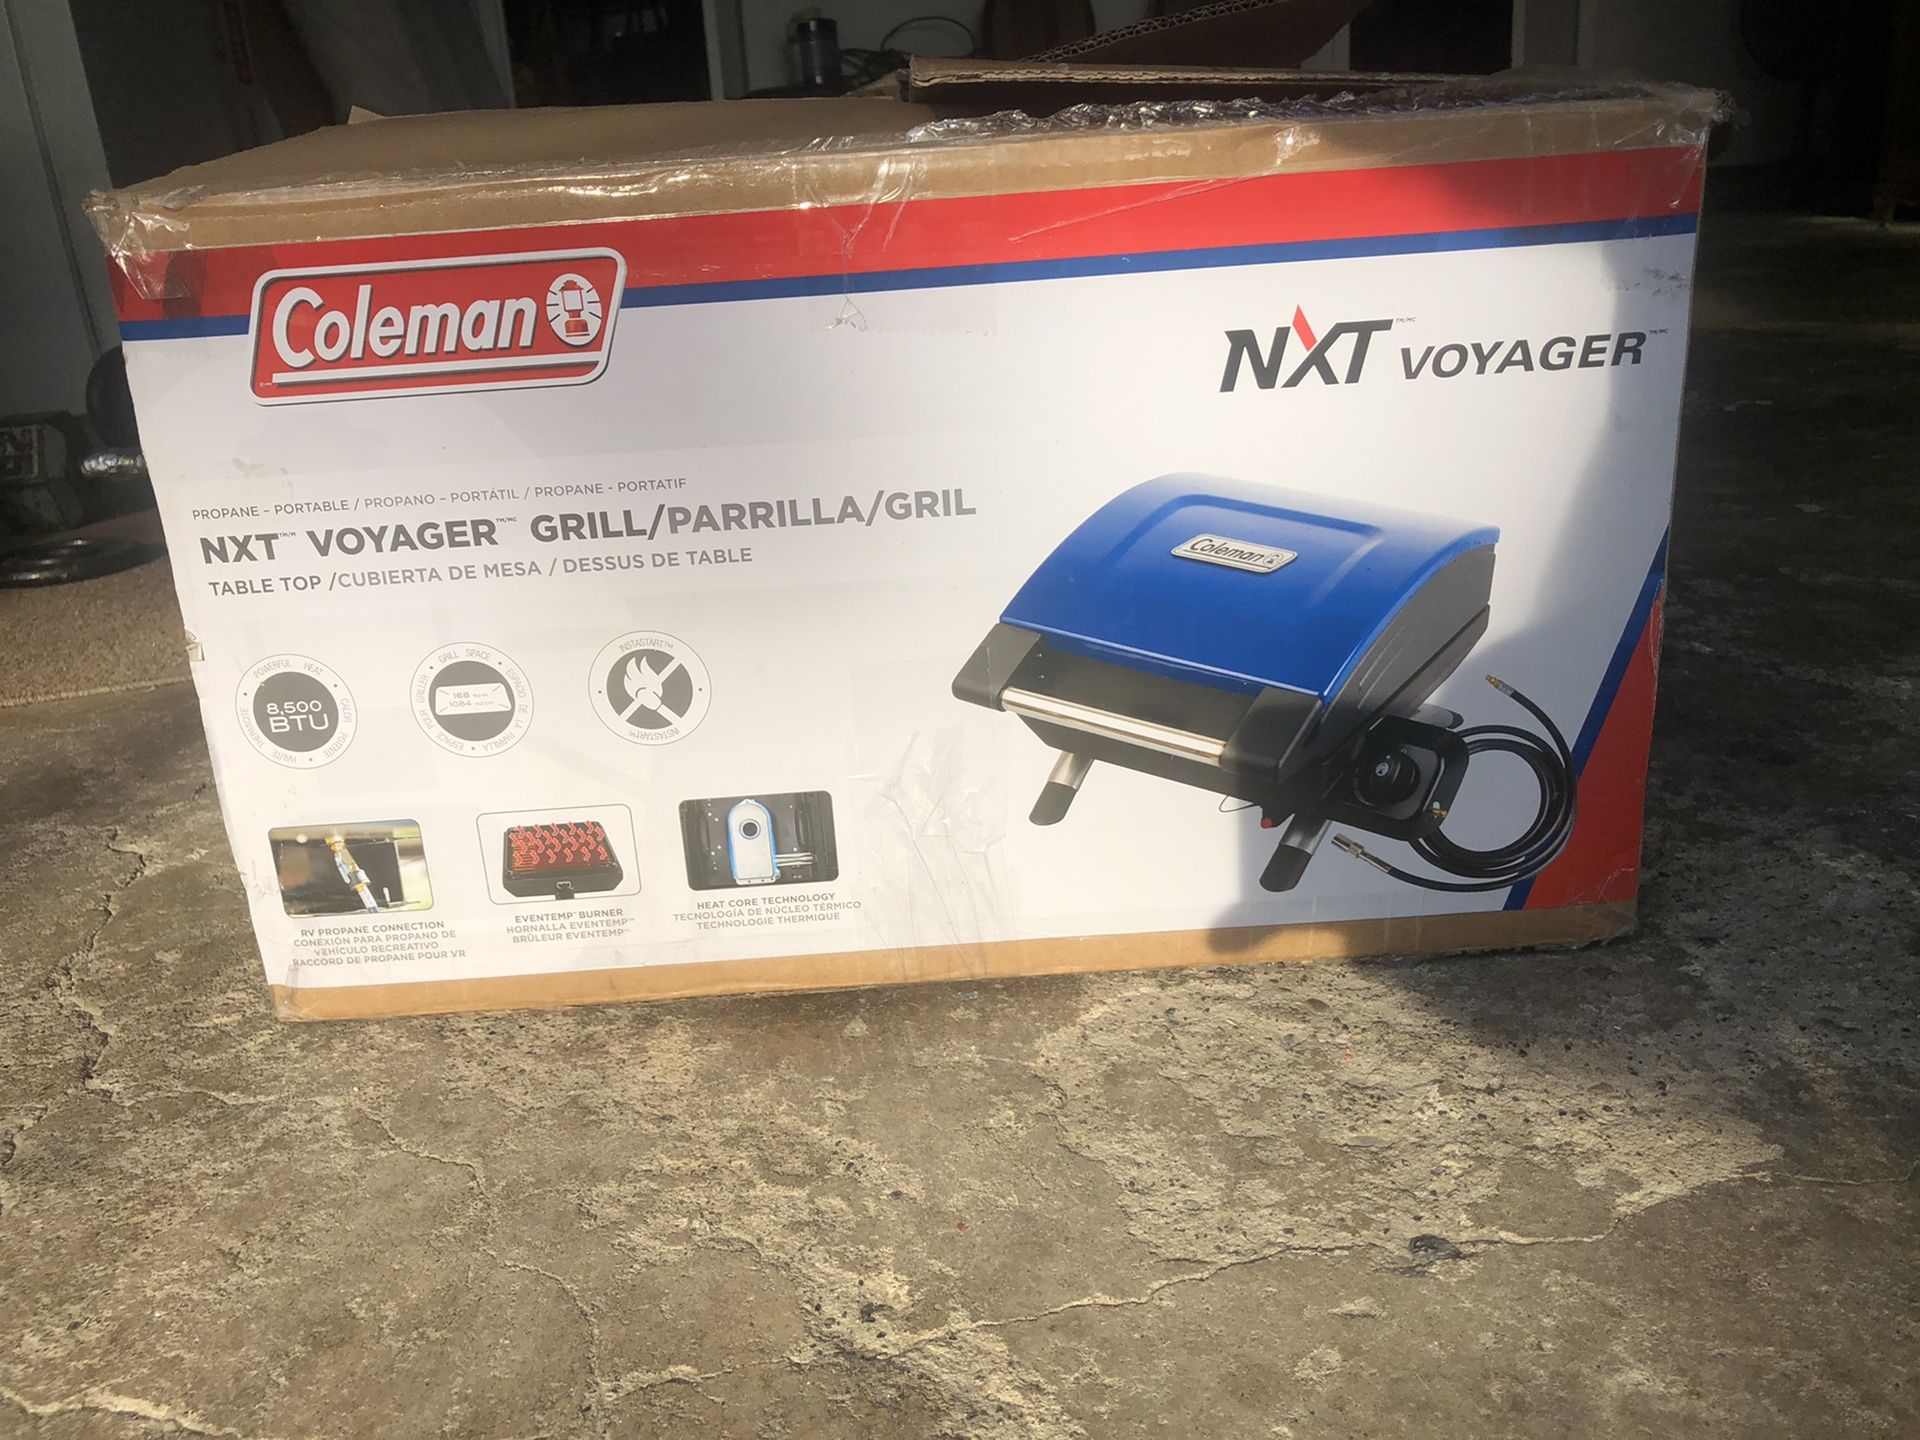 Coleman NXT voyager RV grill